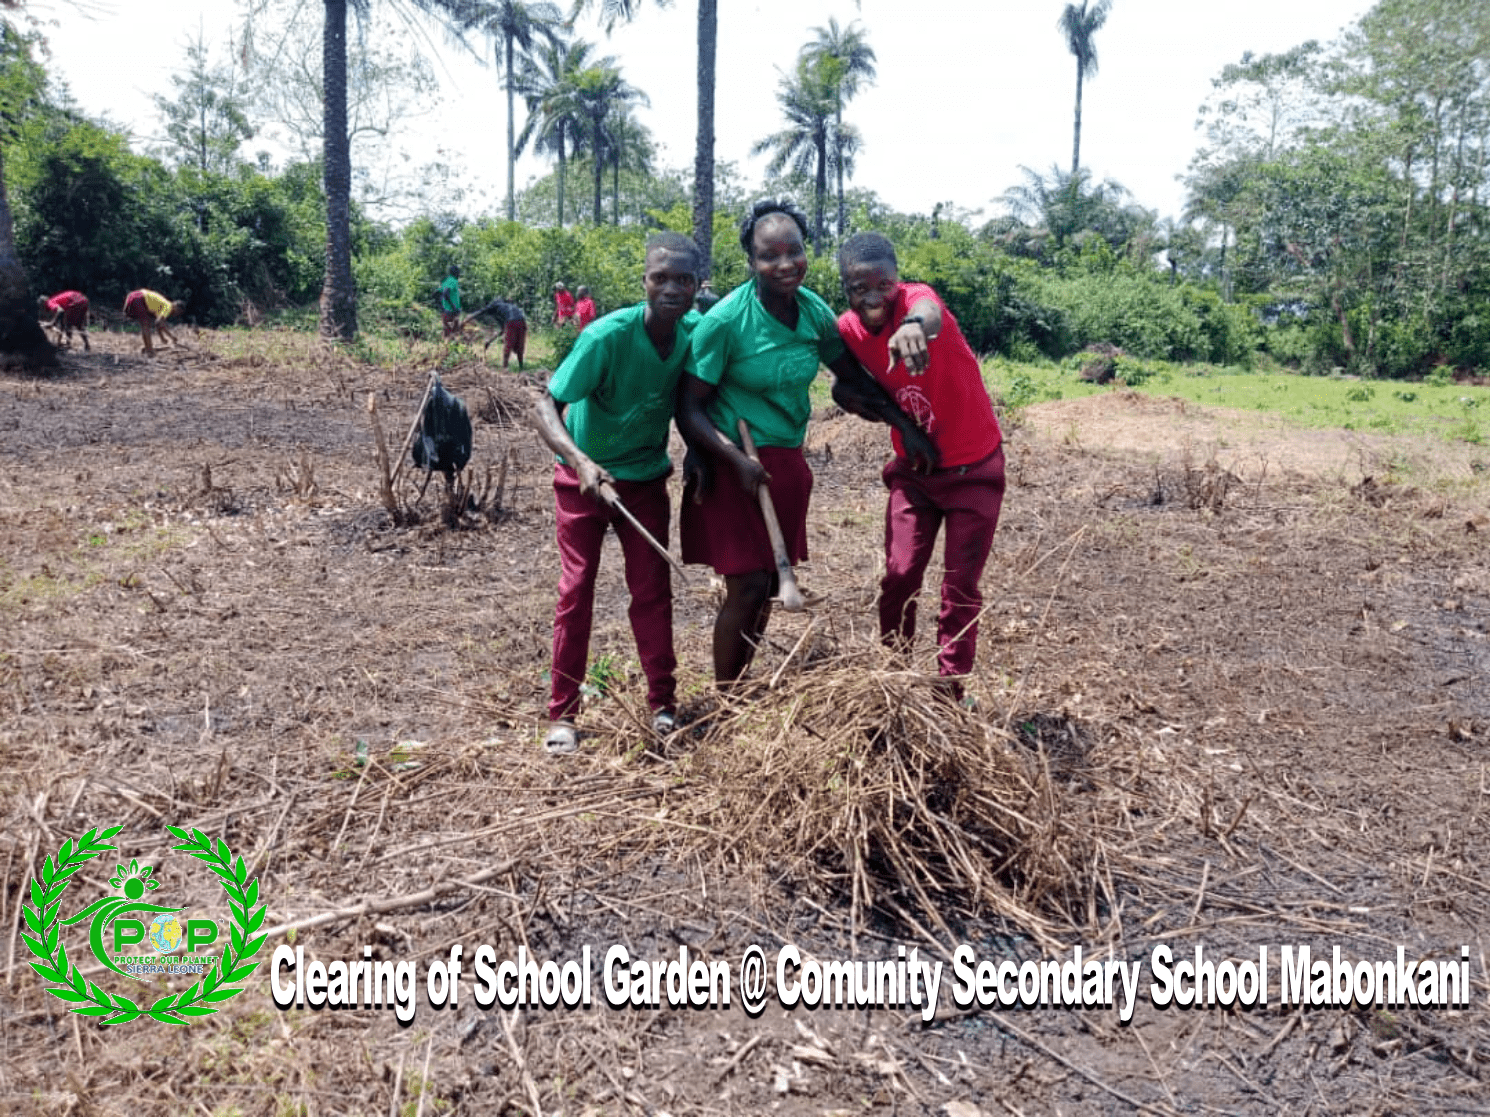 Agroecological Crop Planting of Cassava and Climate Education in School: Sierra Leone